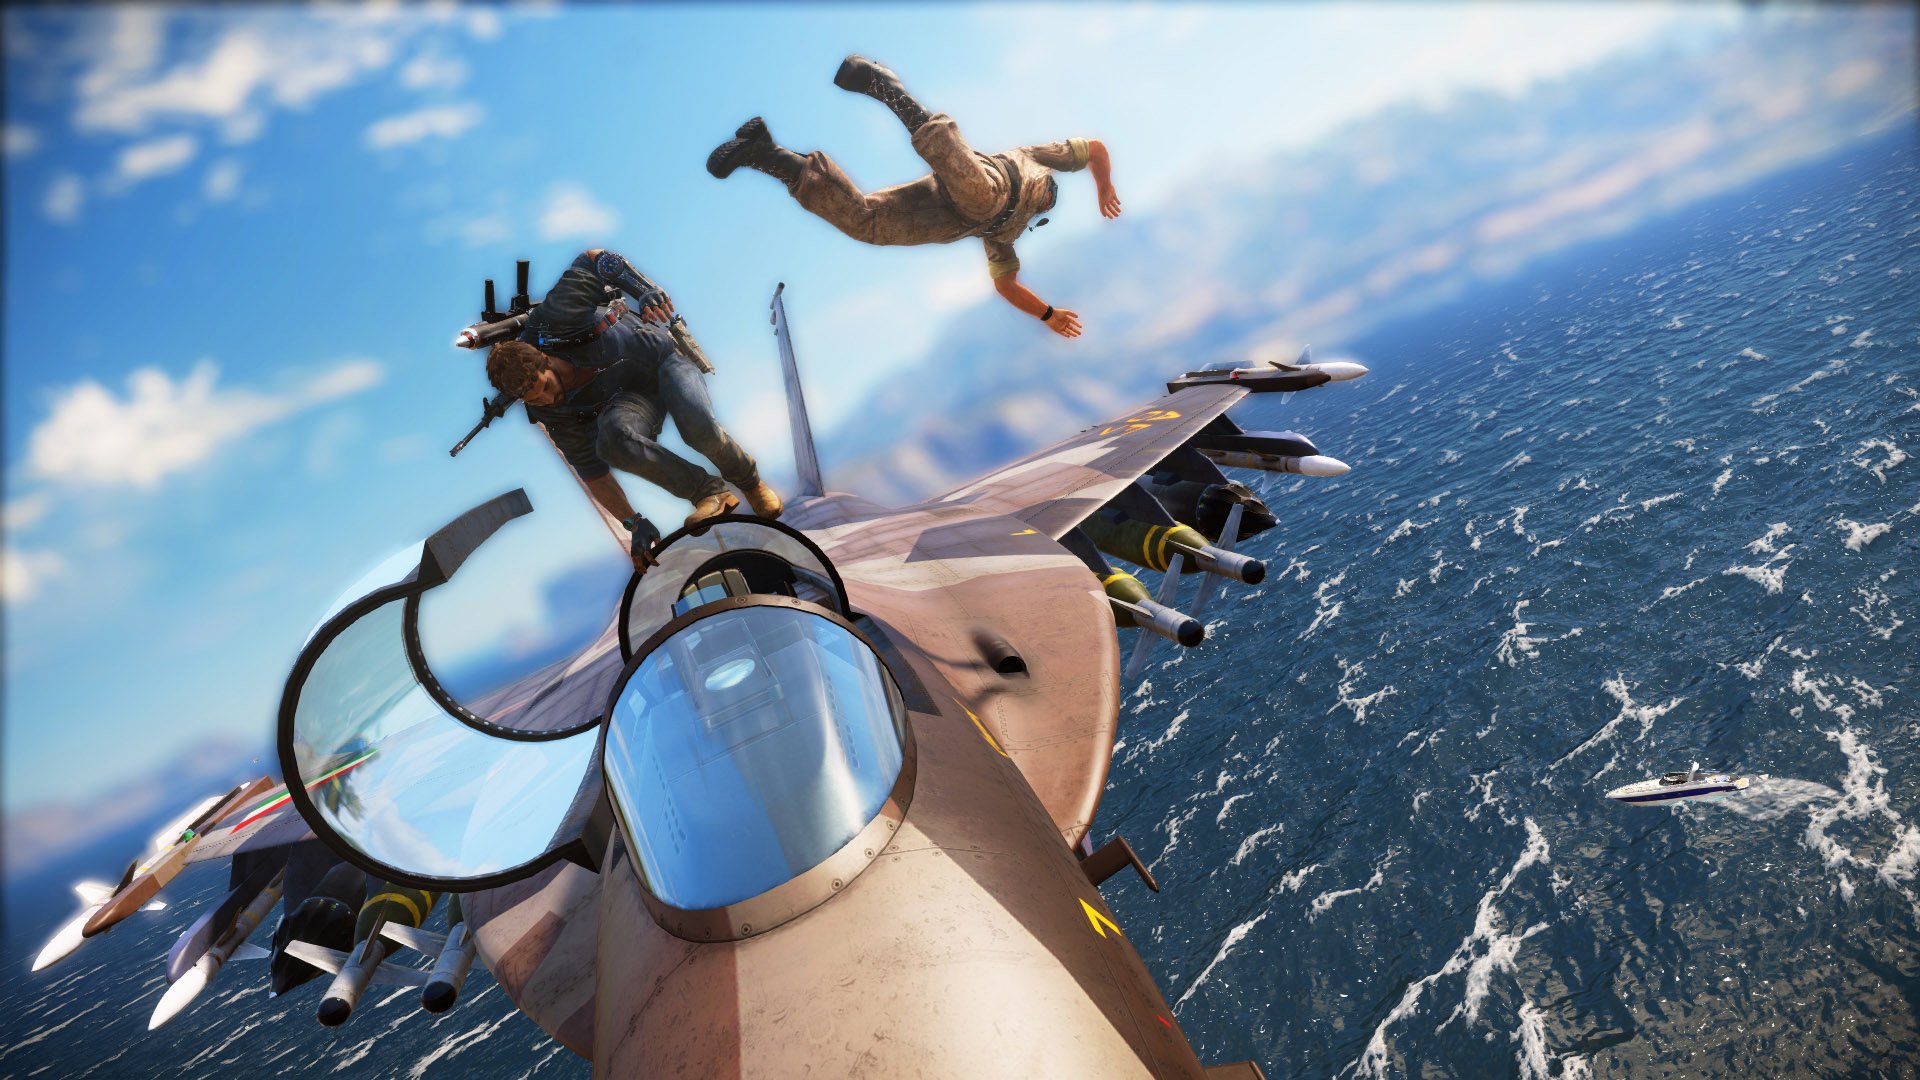 Video Game Just Cause 3 HD Wallpaper